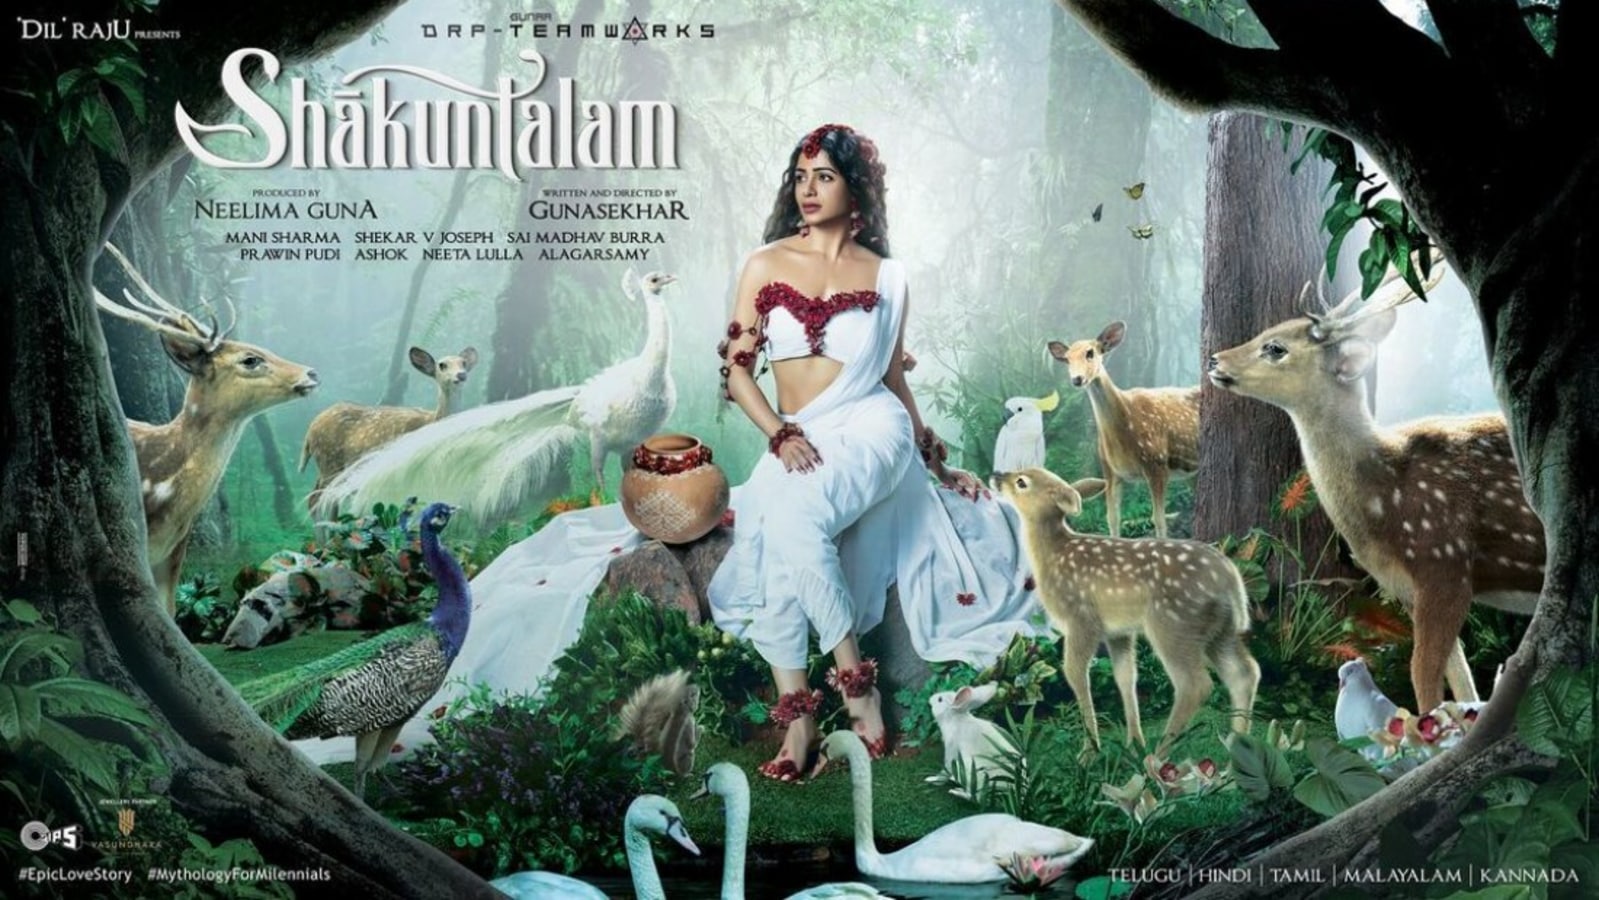 Shakuntalam: Samantha Ruth Prabhu is ethereal as the divine beauty in first look poster